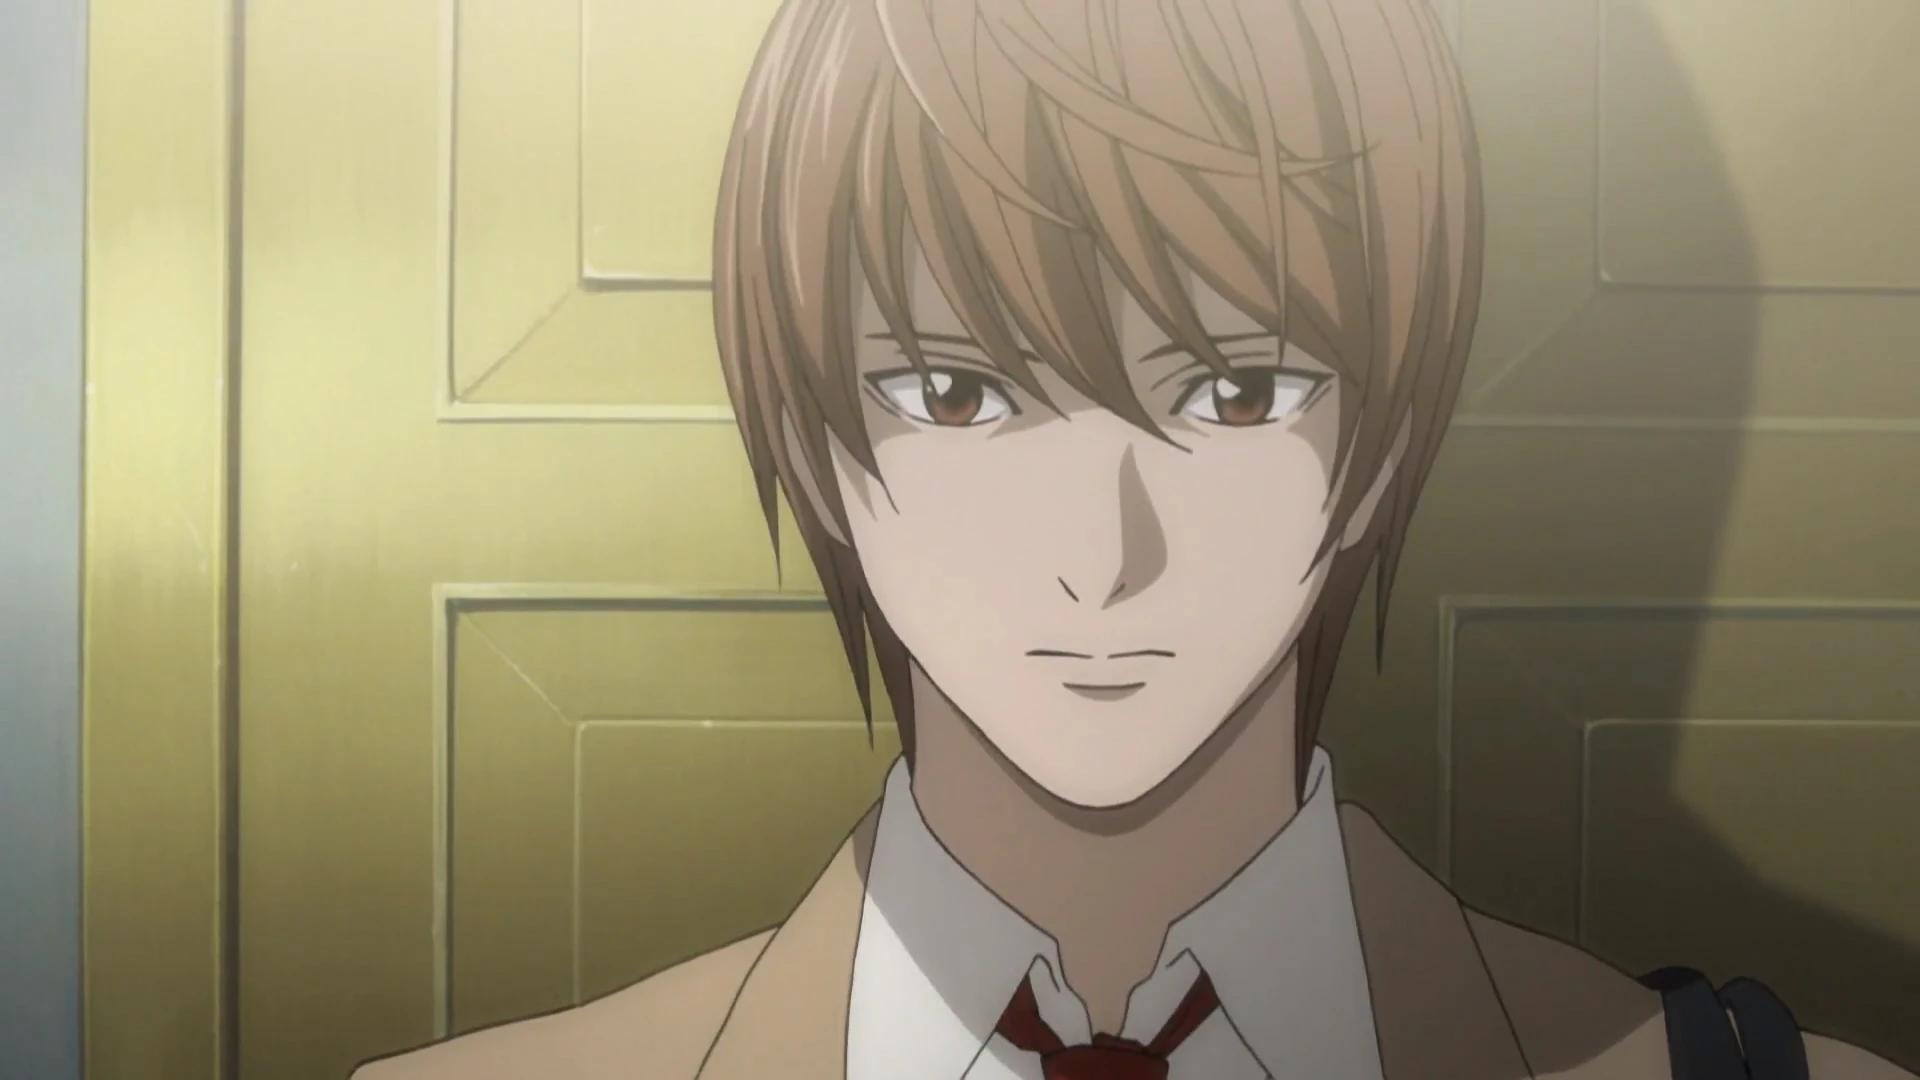 YAGAMI LIGHT (DEATH NOTE)